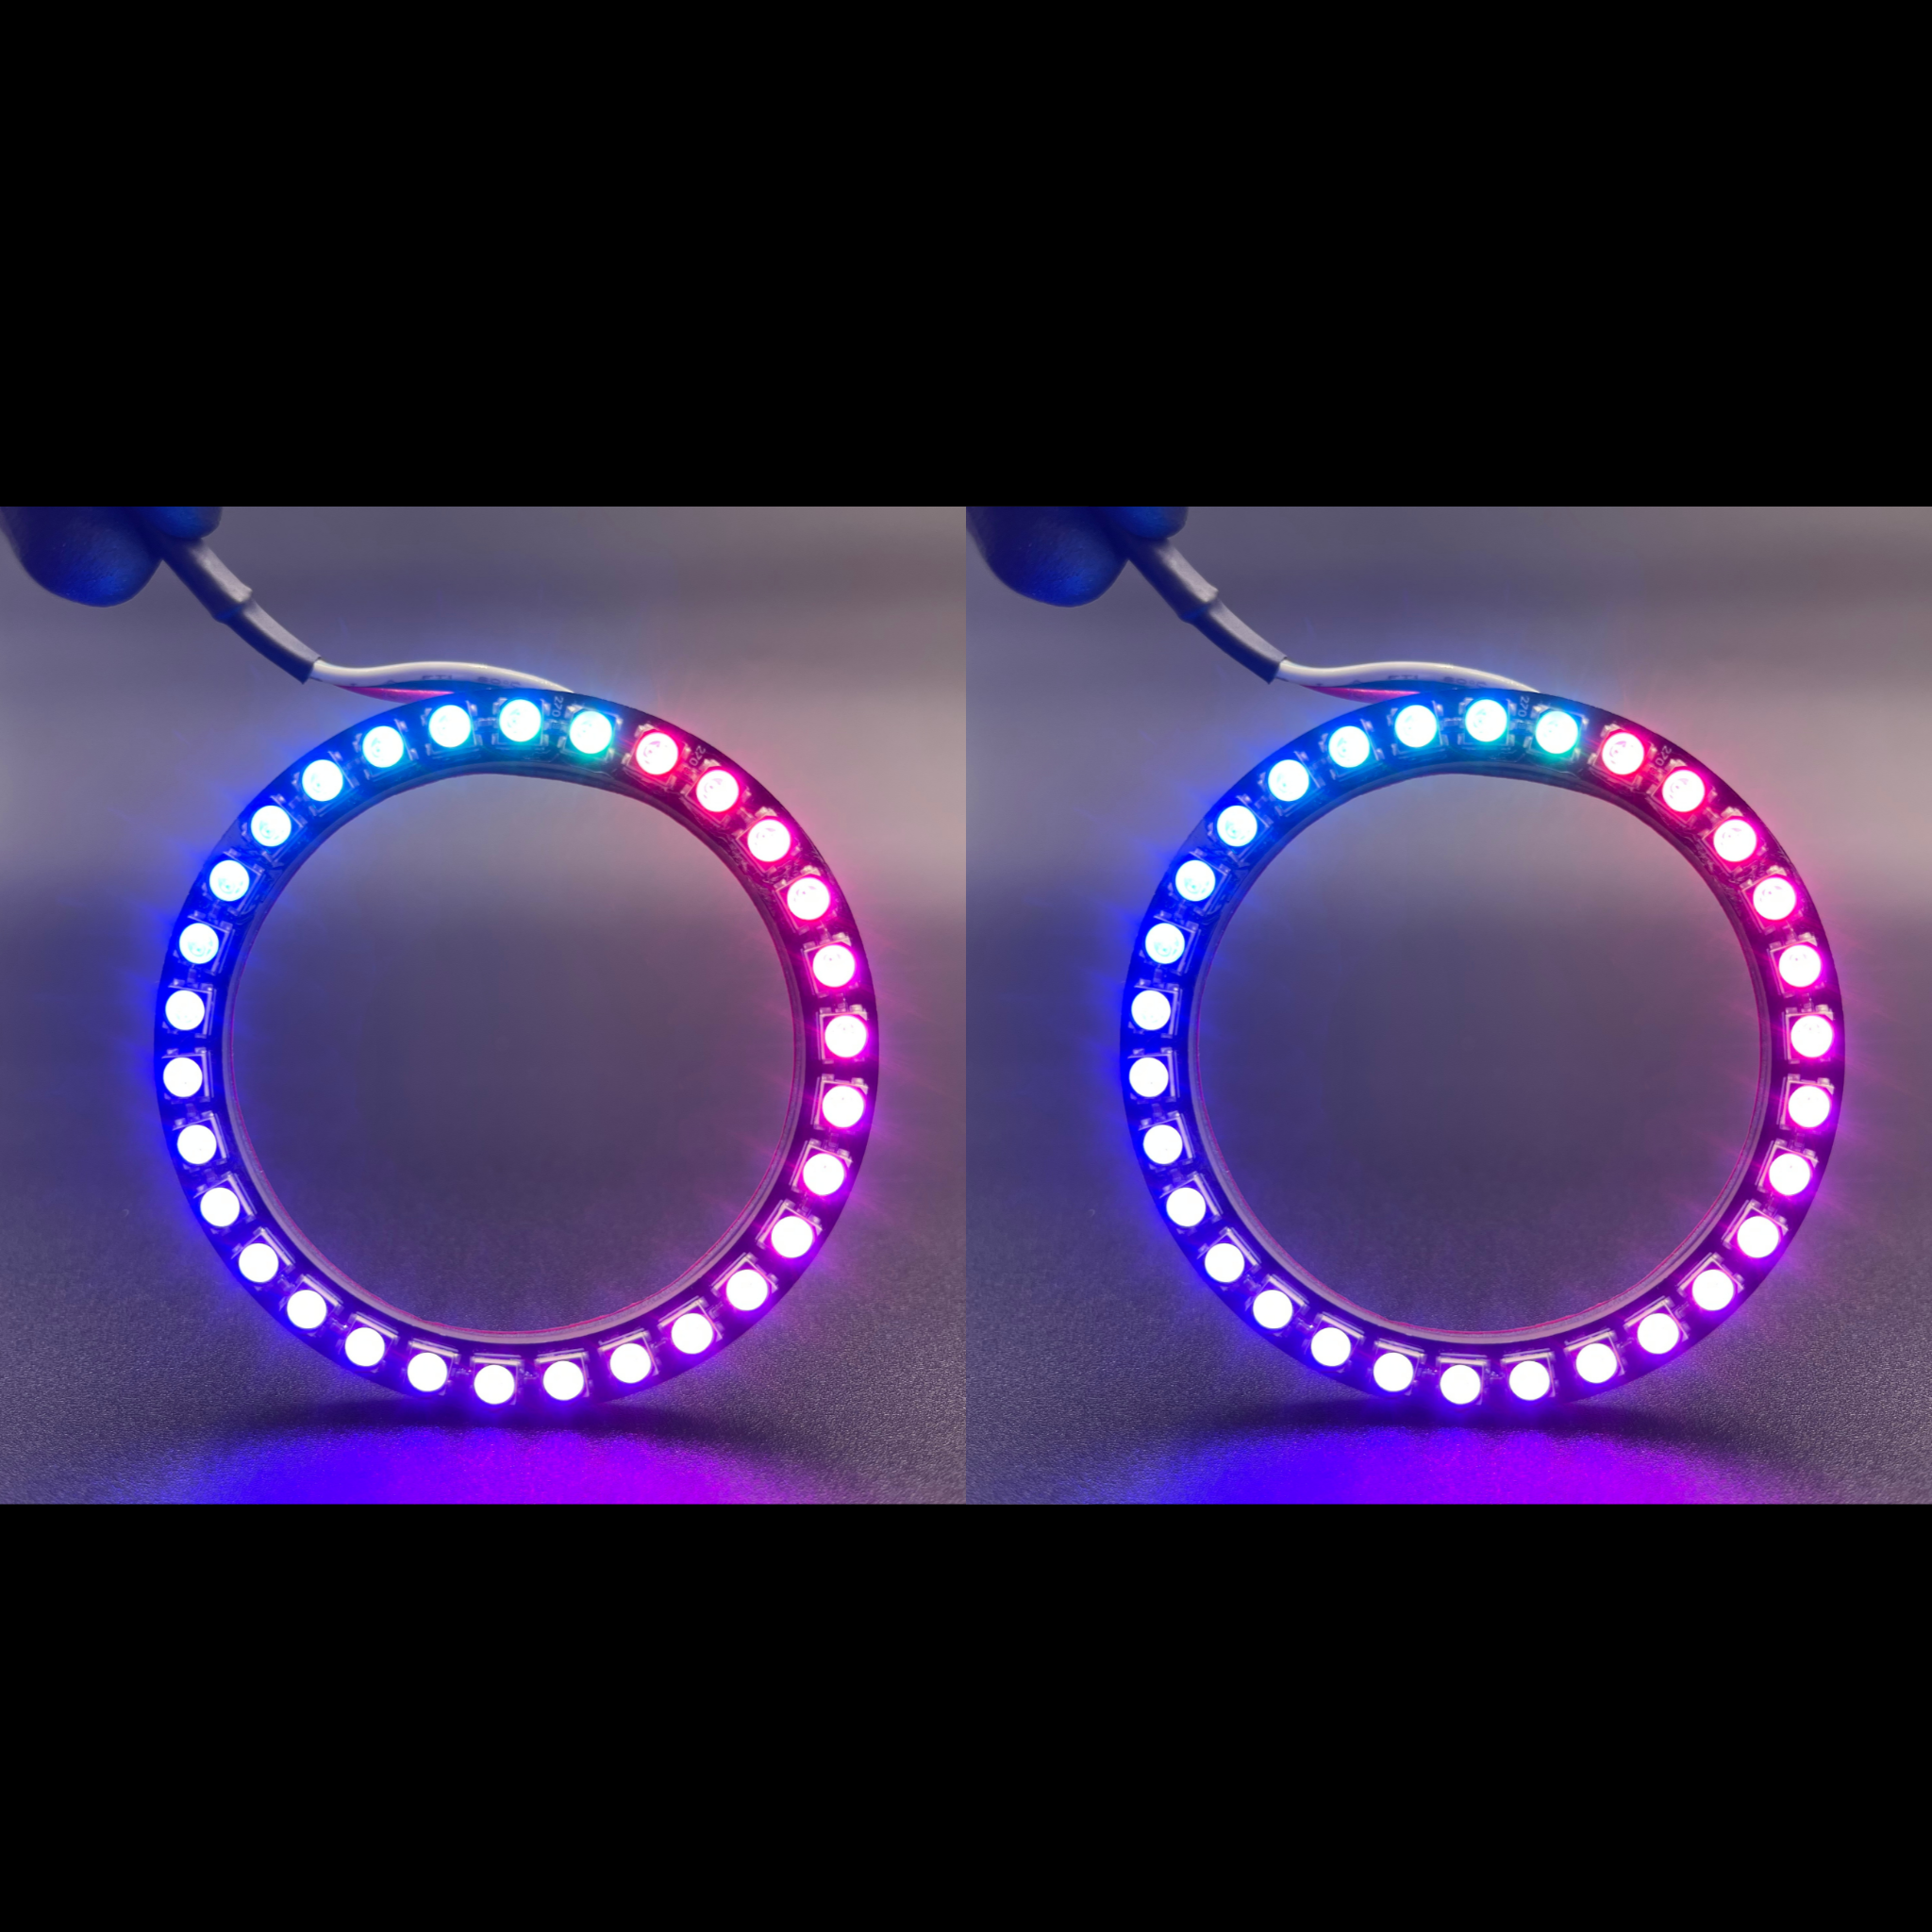 1998-2004 Volkswagen Golf GT Multicolor Halo Kit - RGB Halo Kits Multicolor Flow Series Color Chasing RGBWA LED headlight kit Oracle Lighting Trendz OneUpLighting Morimoto theretrofitsource AutoLEDTech Diode Dynamics